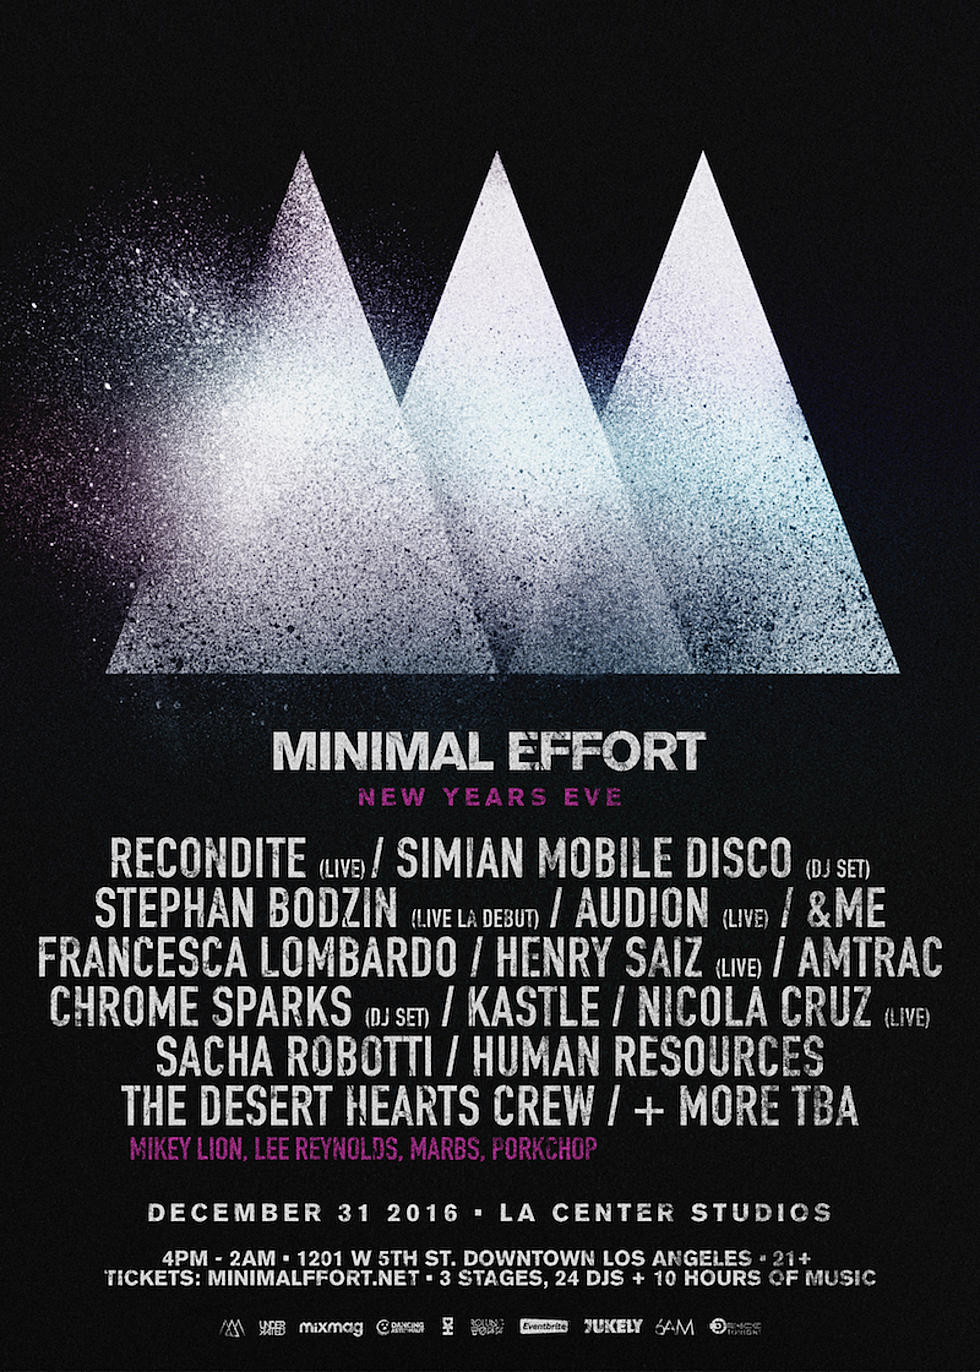 Minimal Effort Announces Phase 1 Lineup for New Years Eve Event